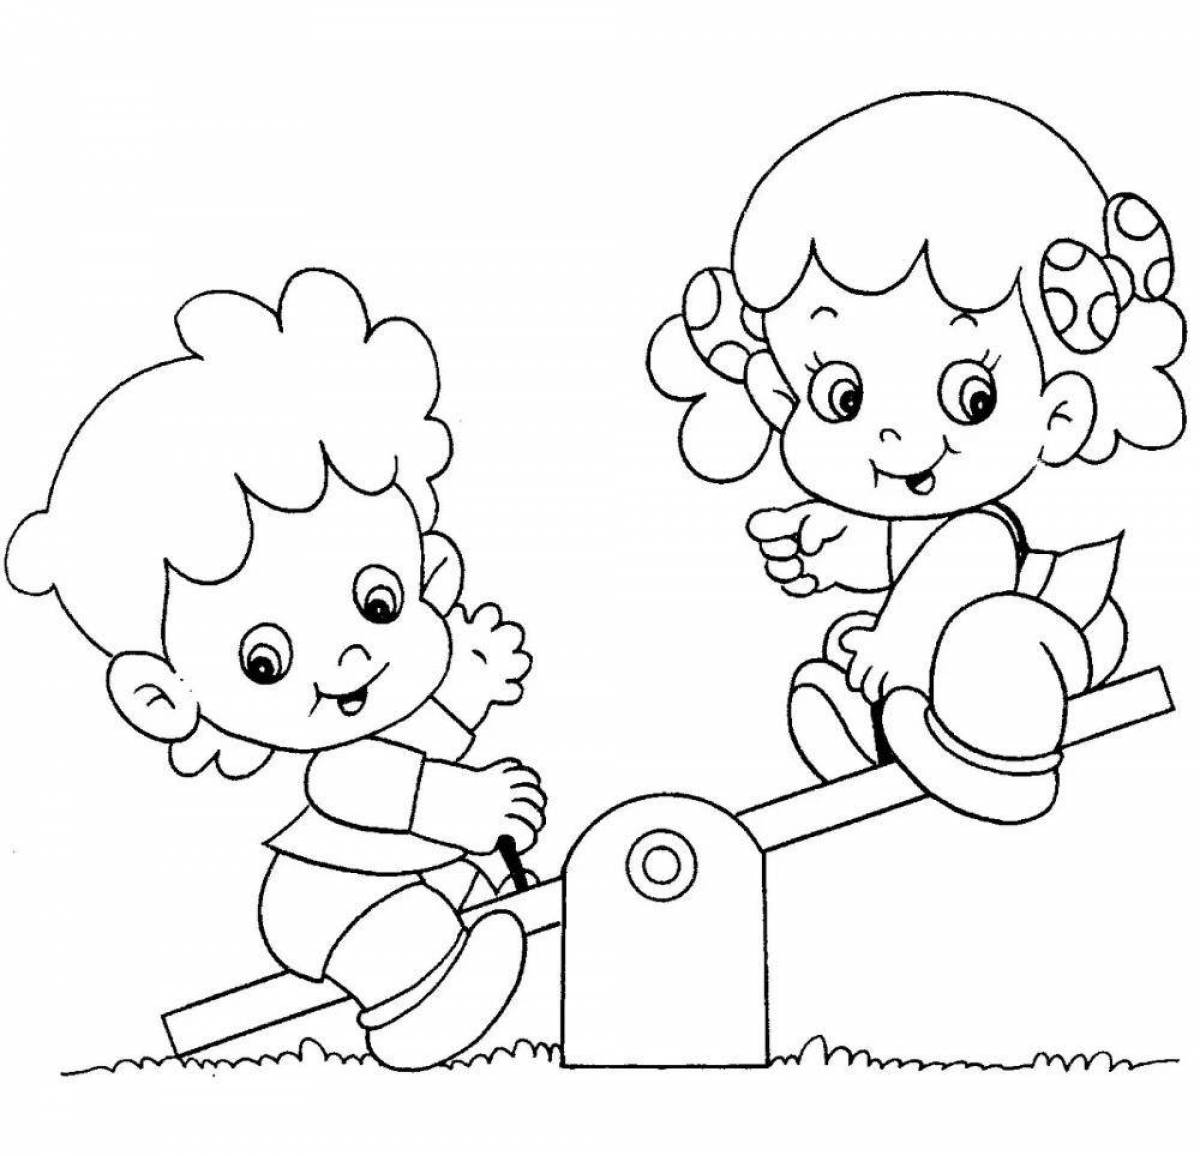 Coloring page blissful childhood